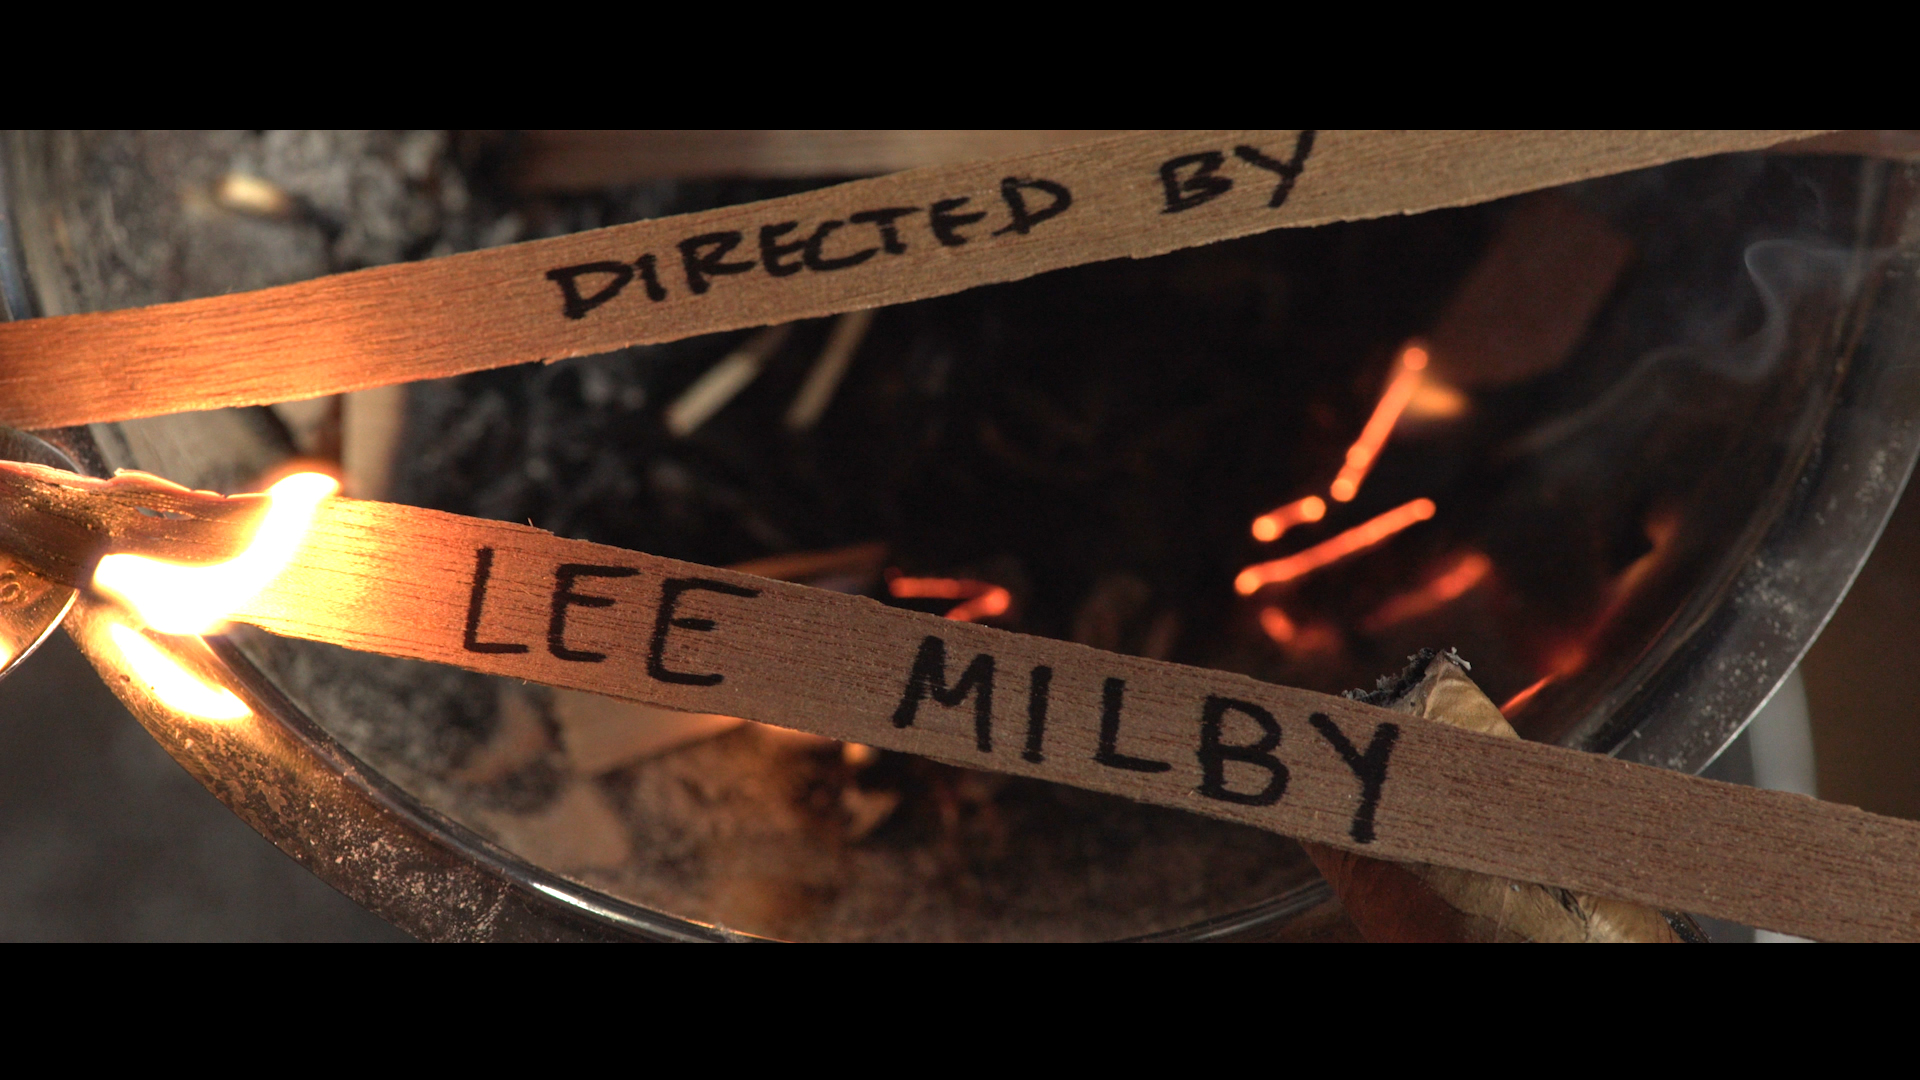 lee-milby-director-nyc